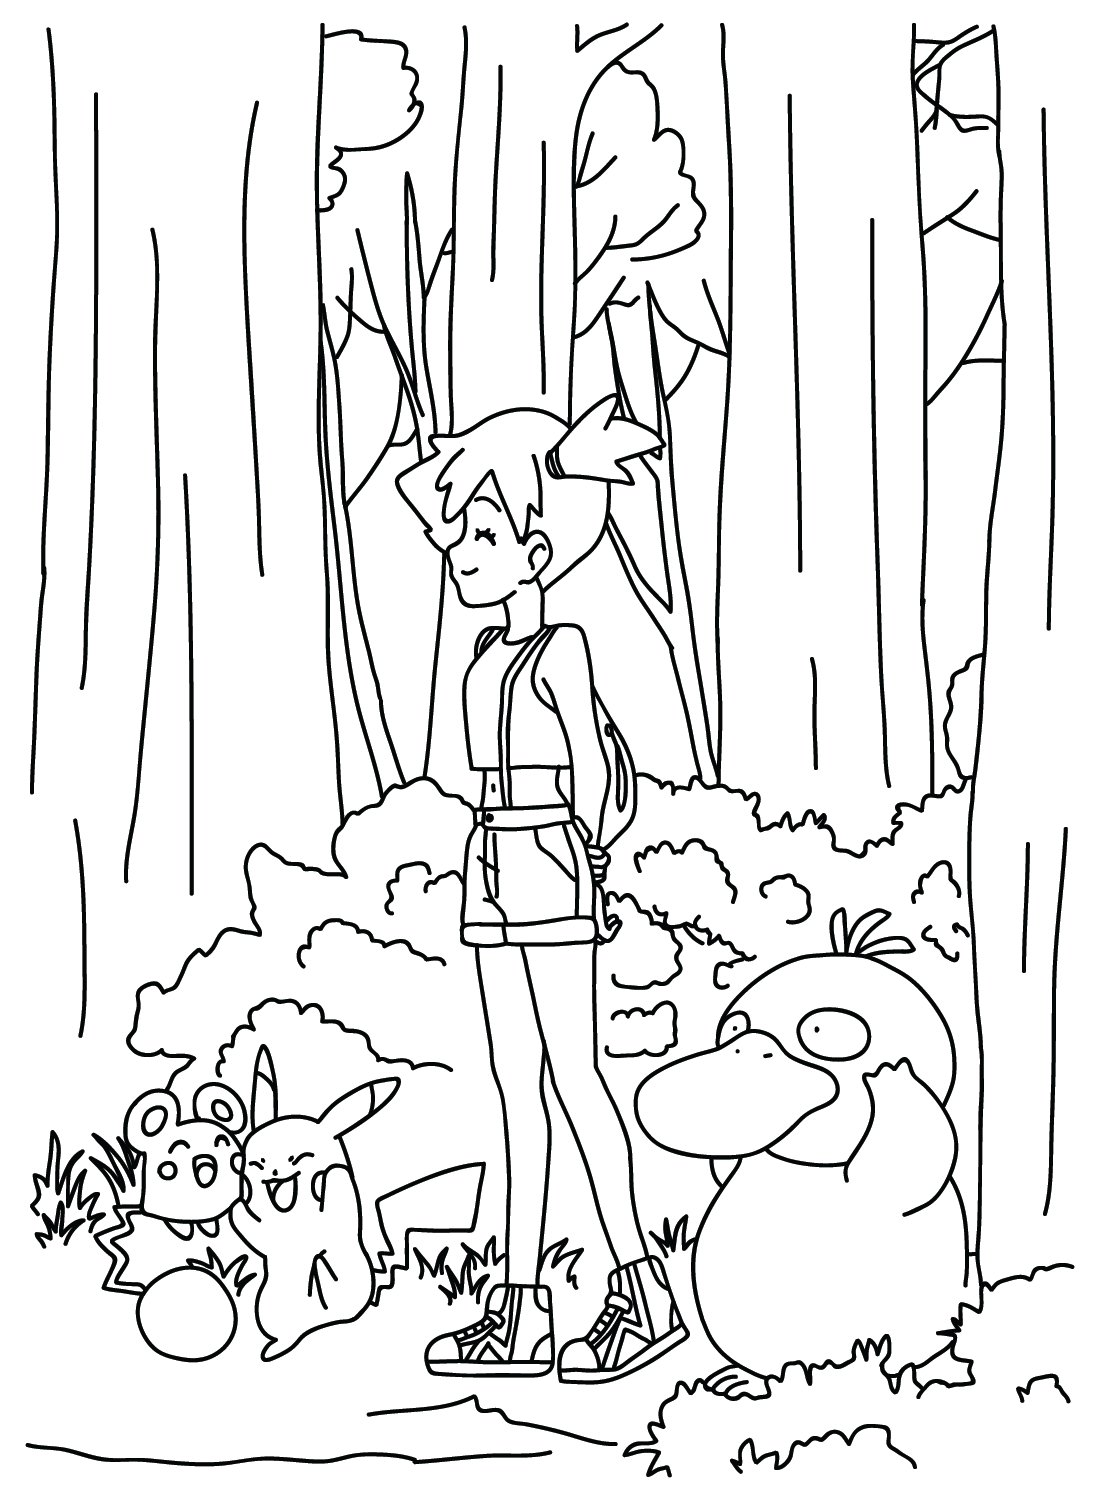 Misty Coloring Page from Misty